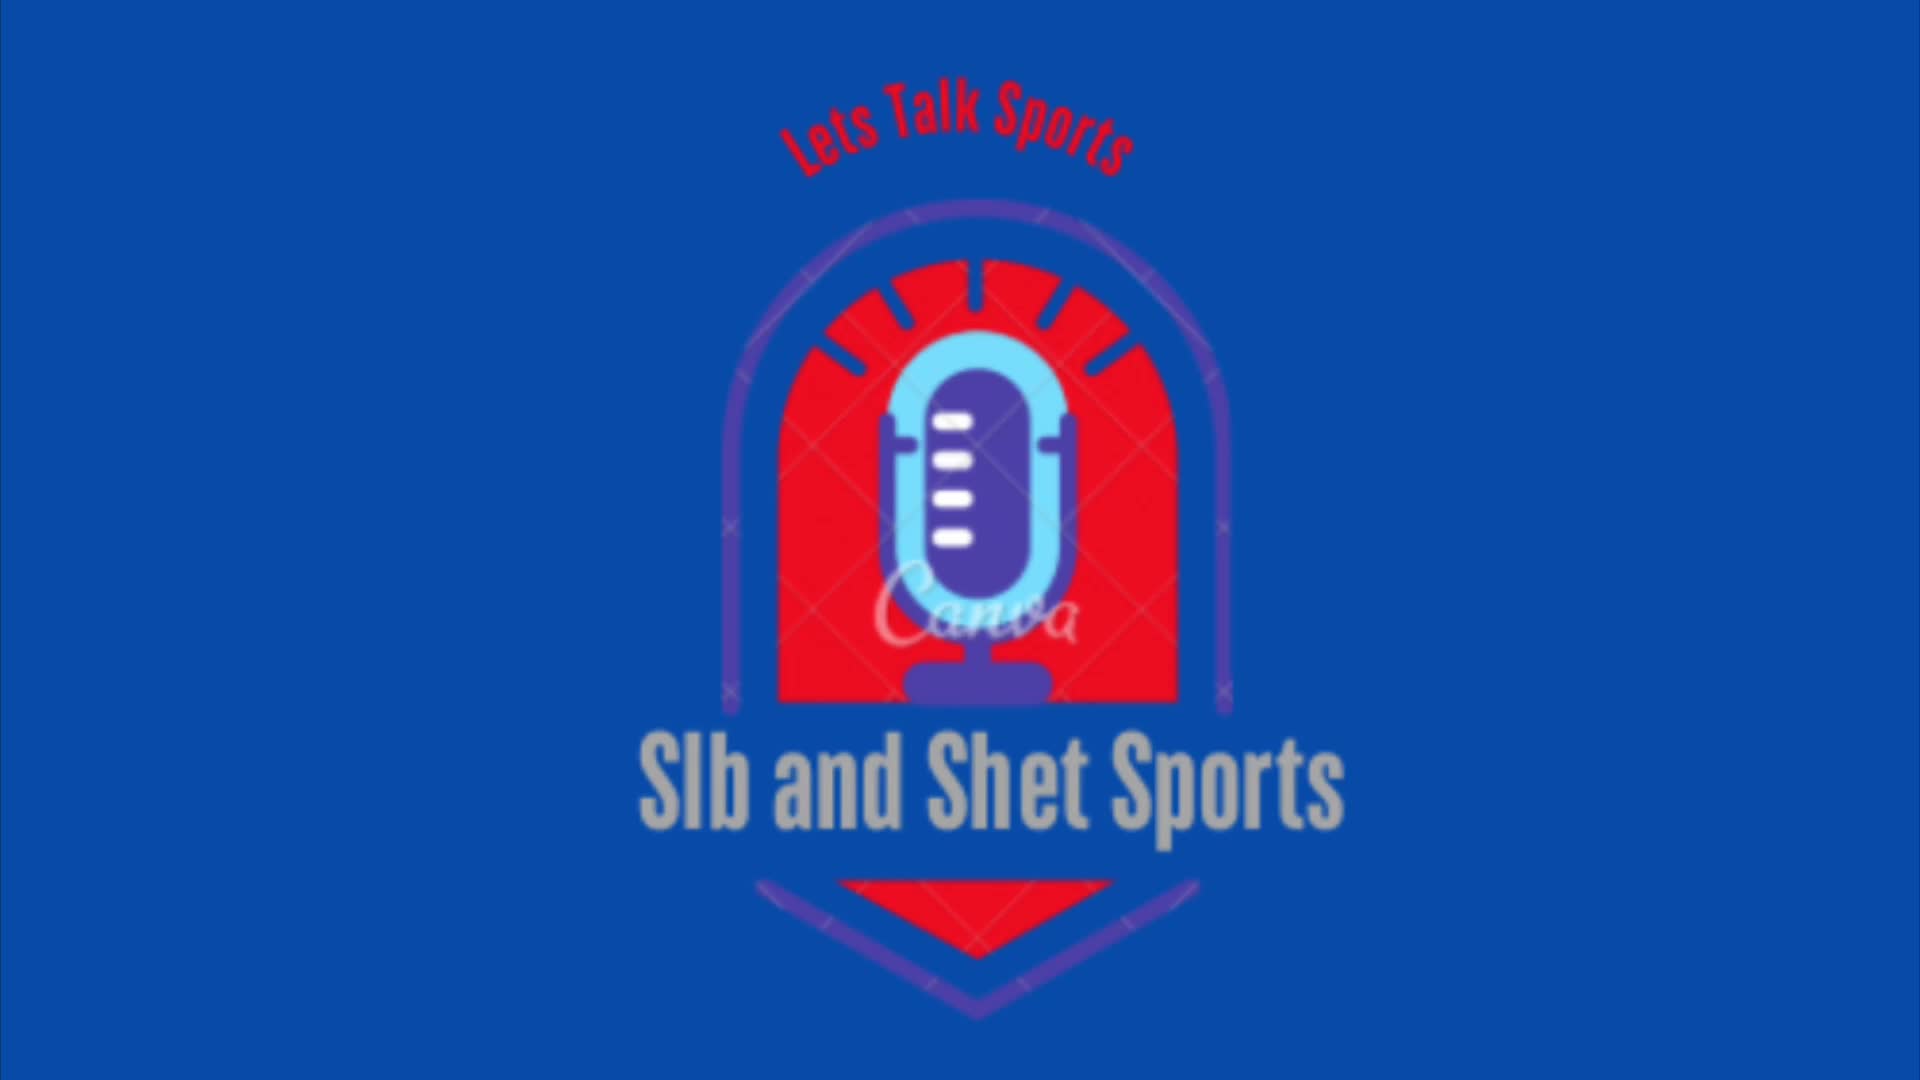 Shet and Sib's Sports Podcast